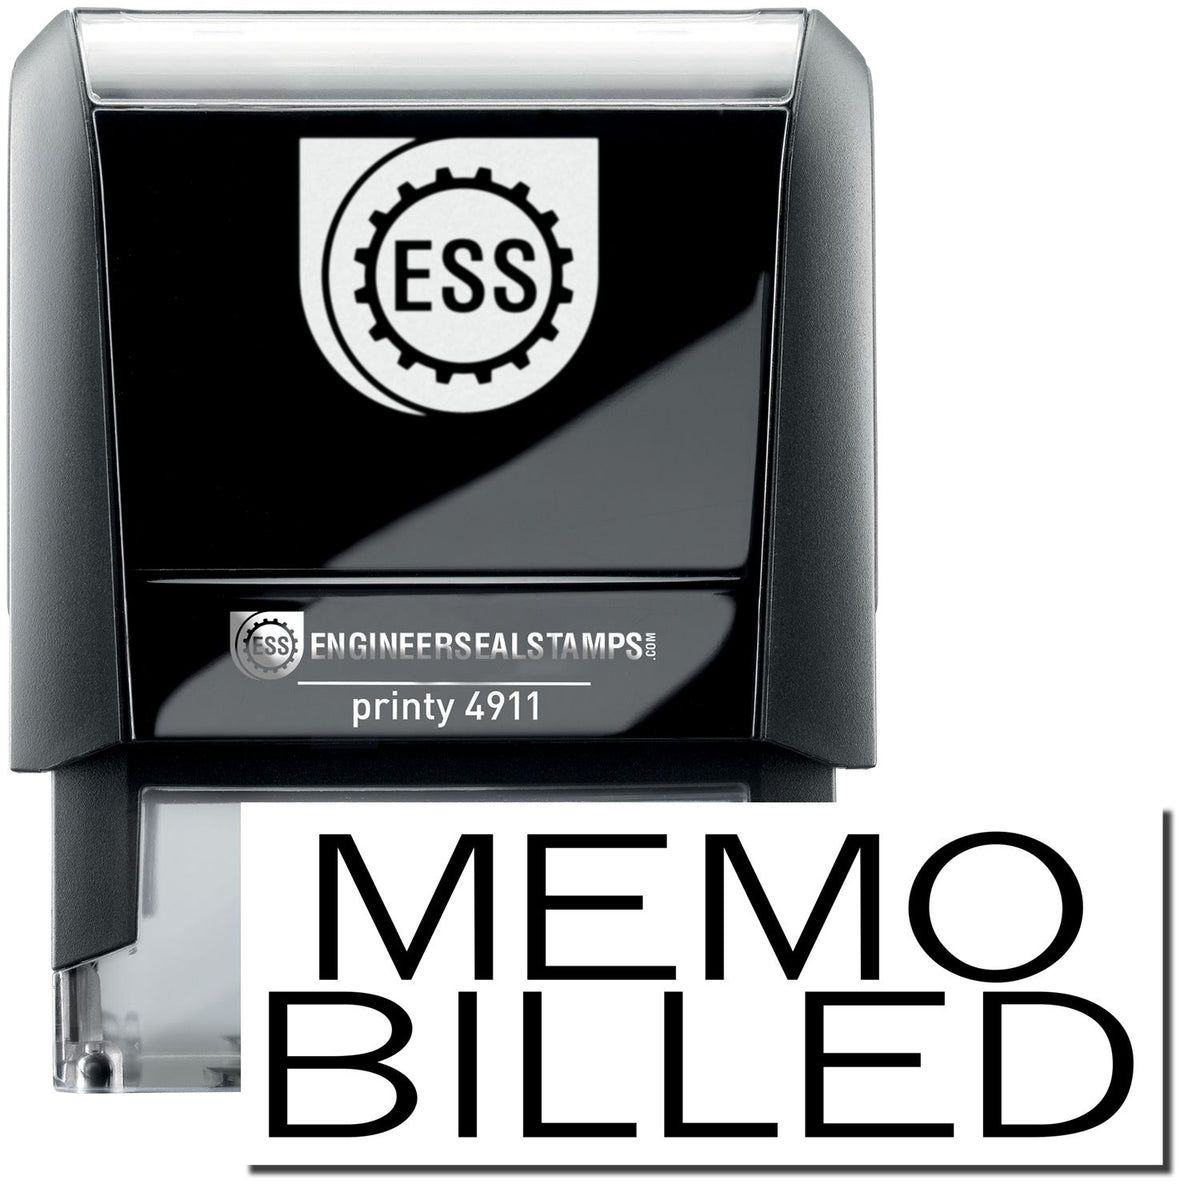 A self-inking stamp with a stamped image showing how the text &quot;MEMO BILLED&quot; is displayed after stamping.